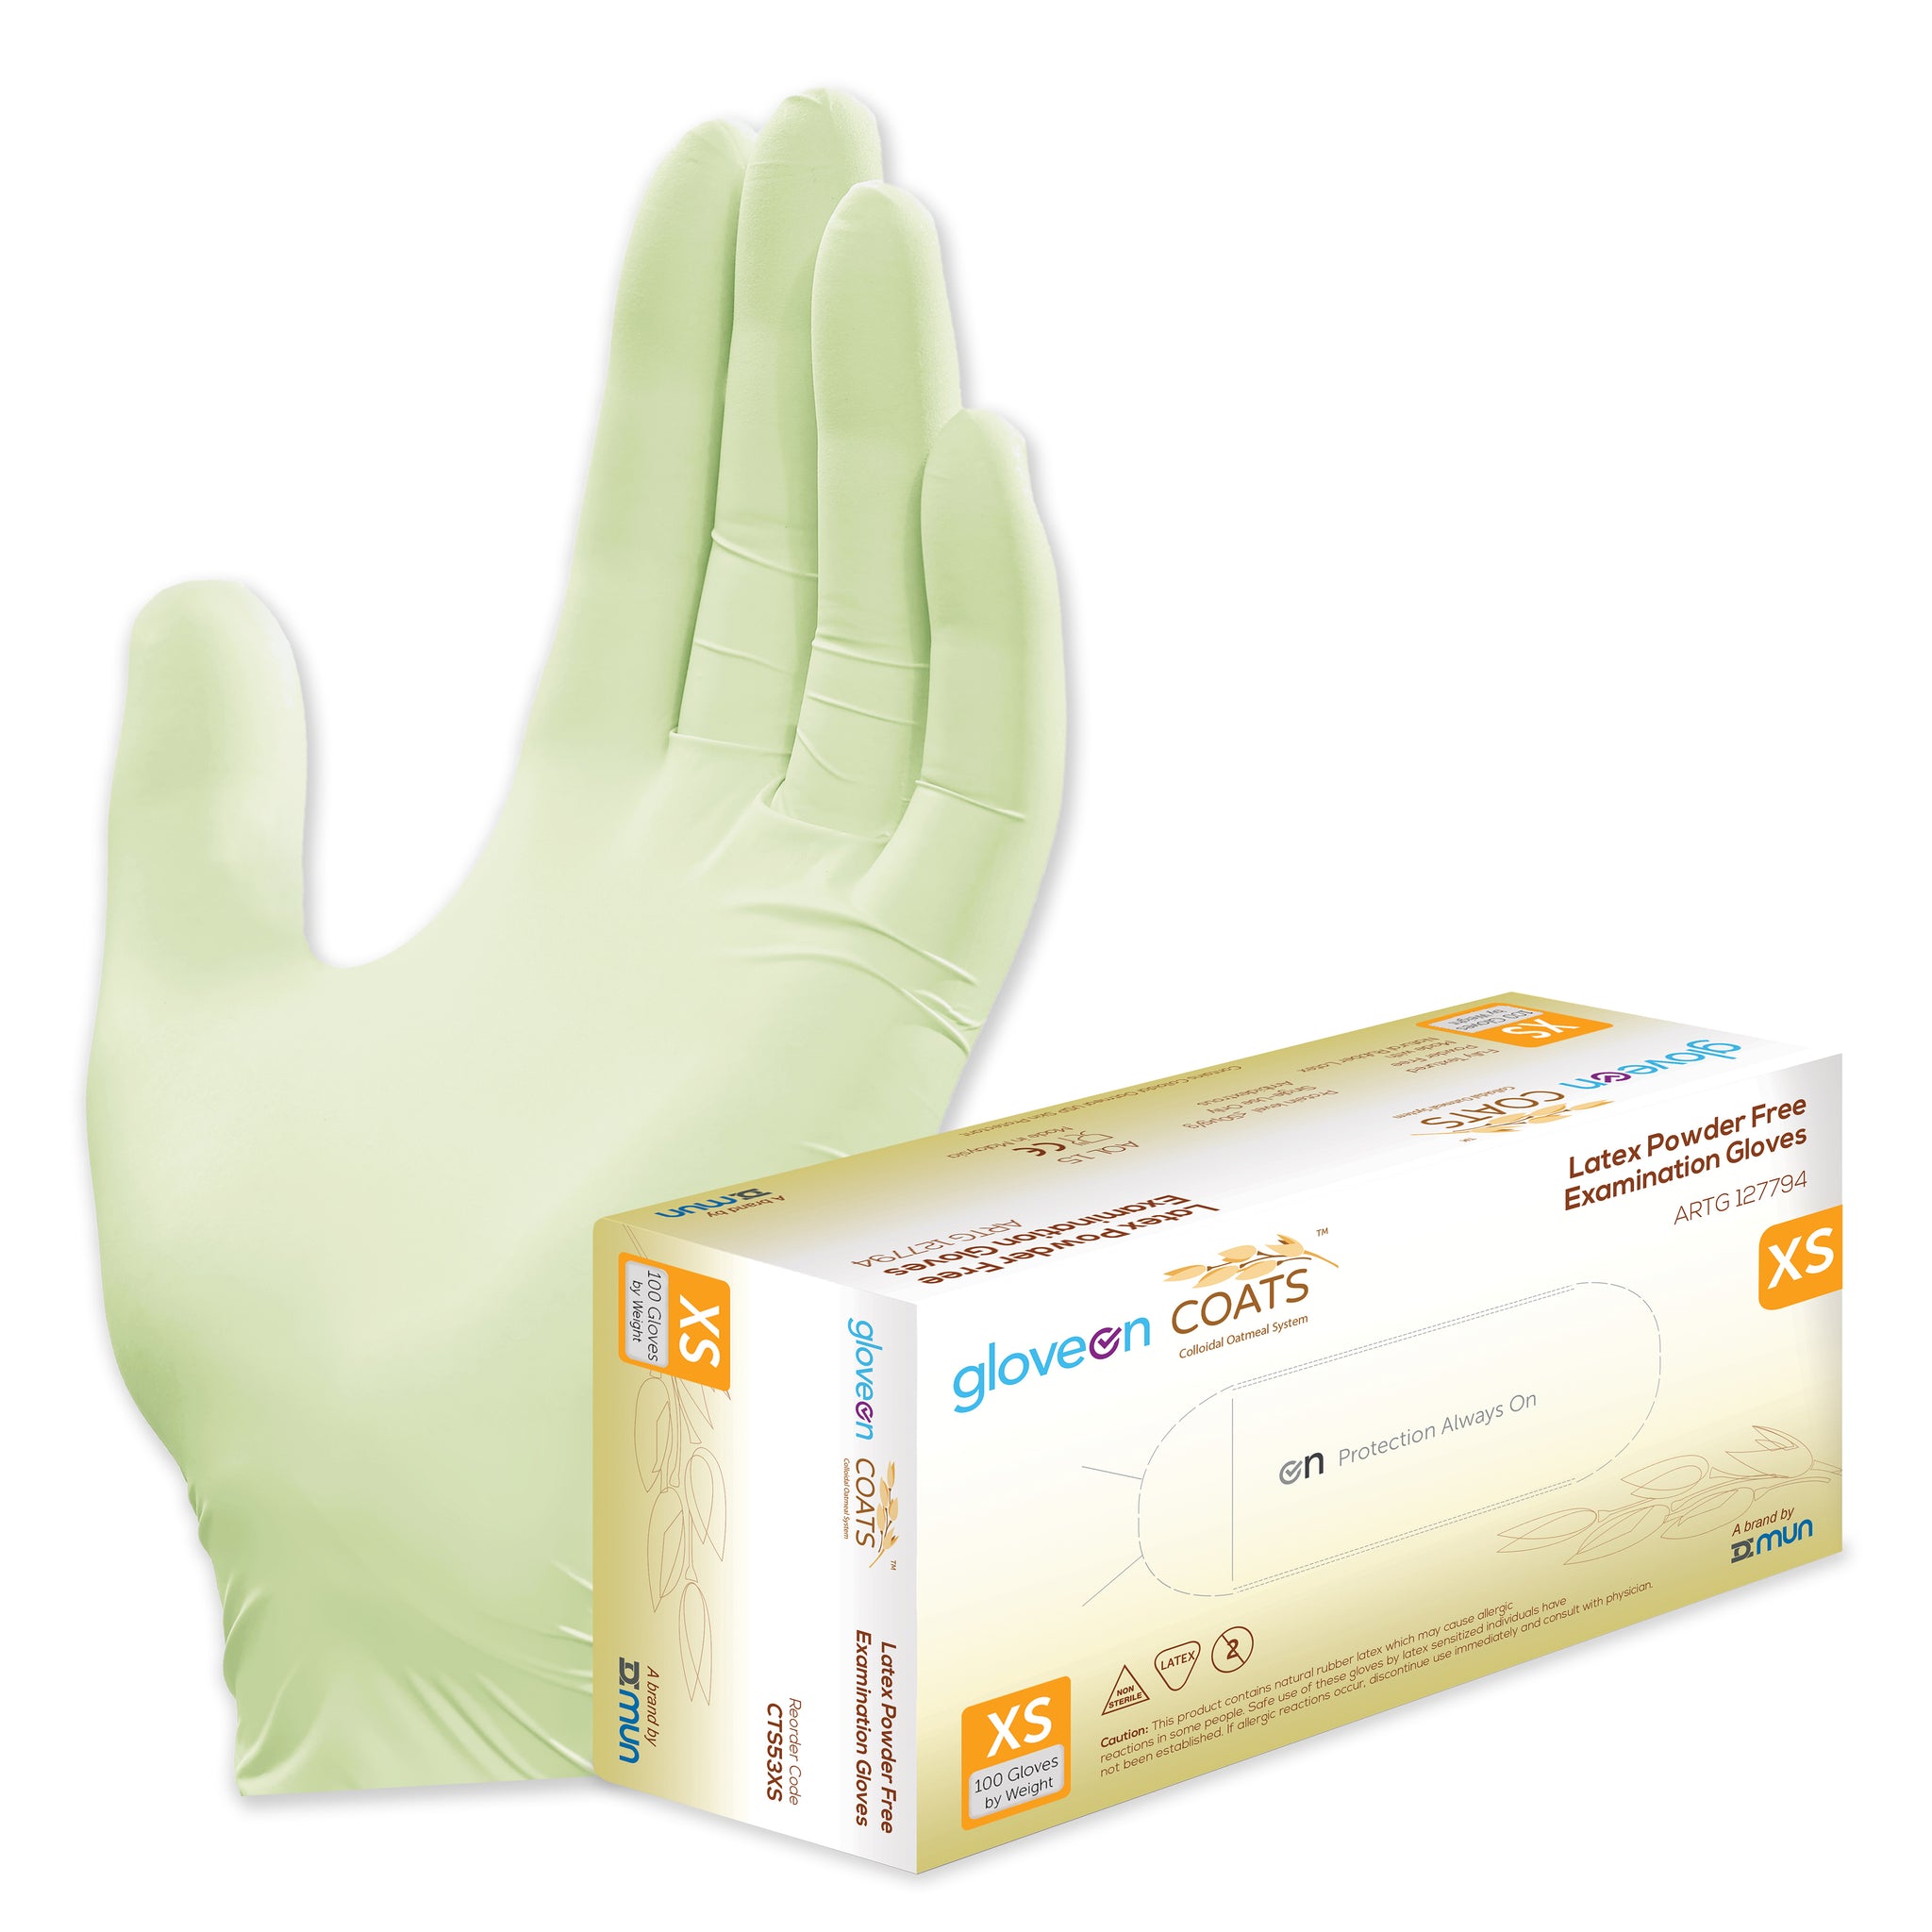 Latex Exam Gloves with Colloidal Oatmeal System, Powder Free, Non-Sterile, Fully Textured, Colloidal Oats Coated, Standard Cuff, Lime Green - Box of 100, XS